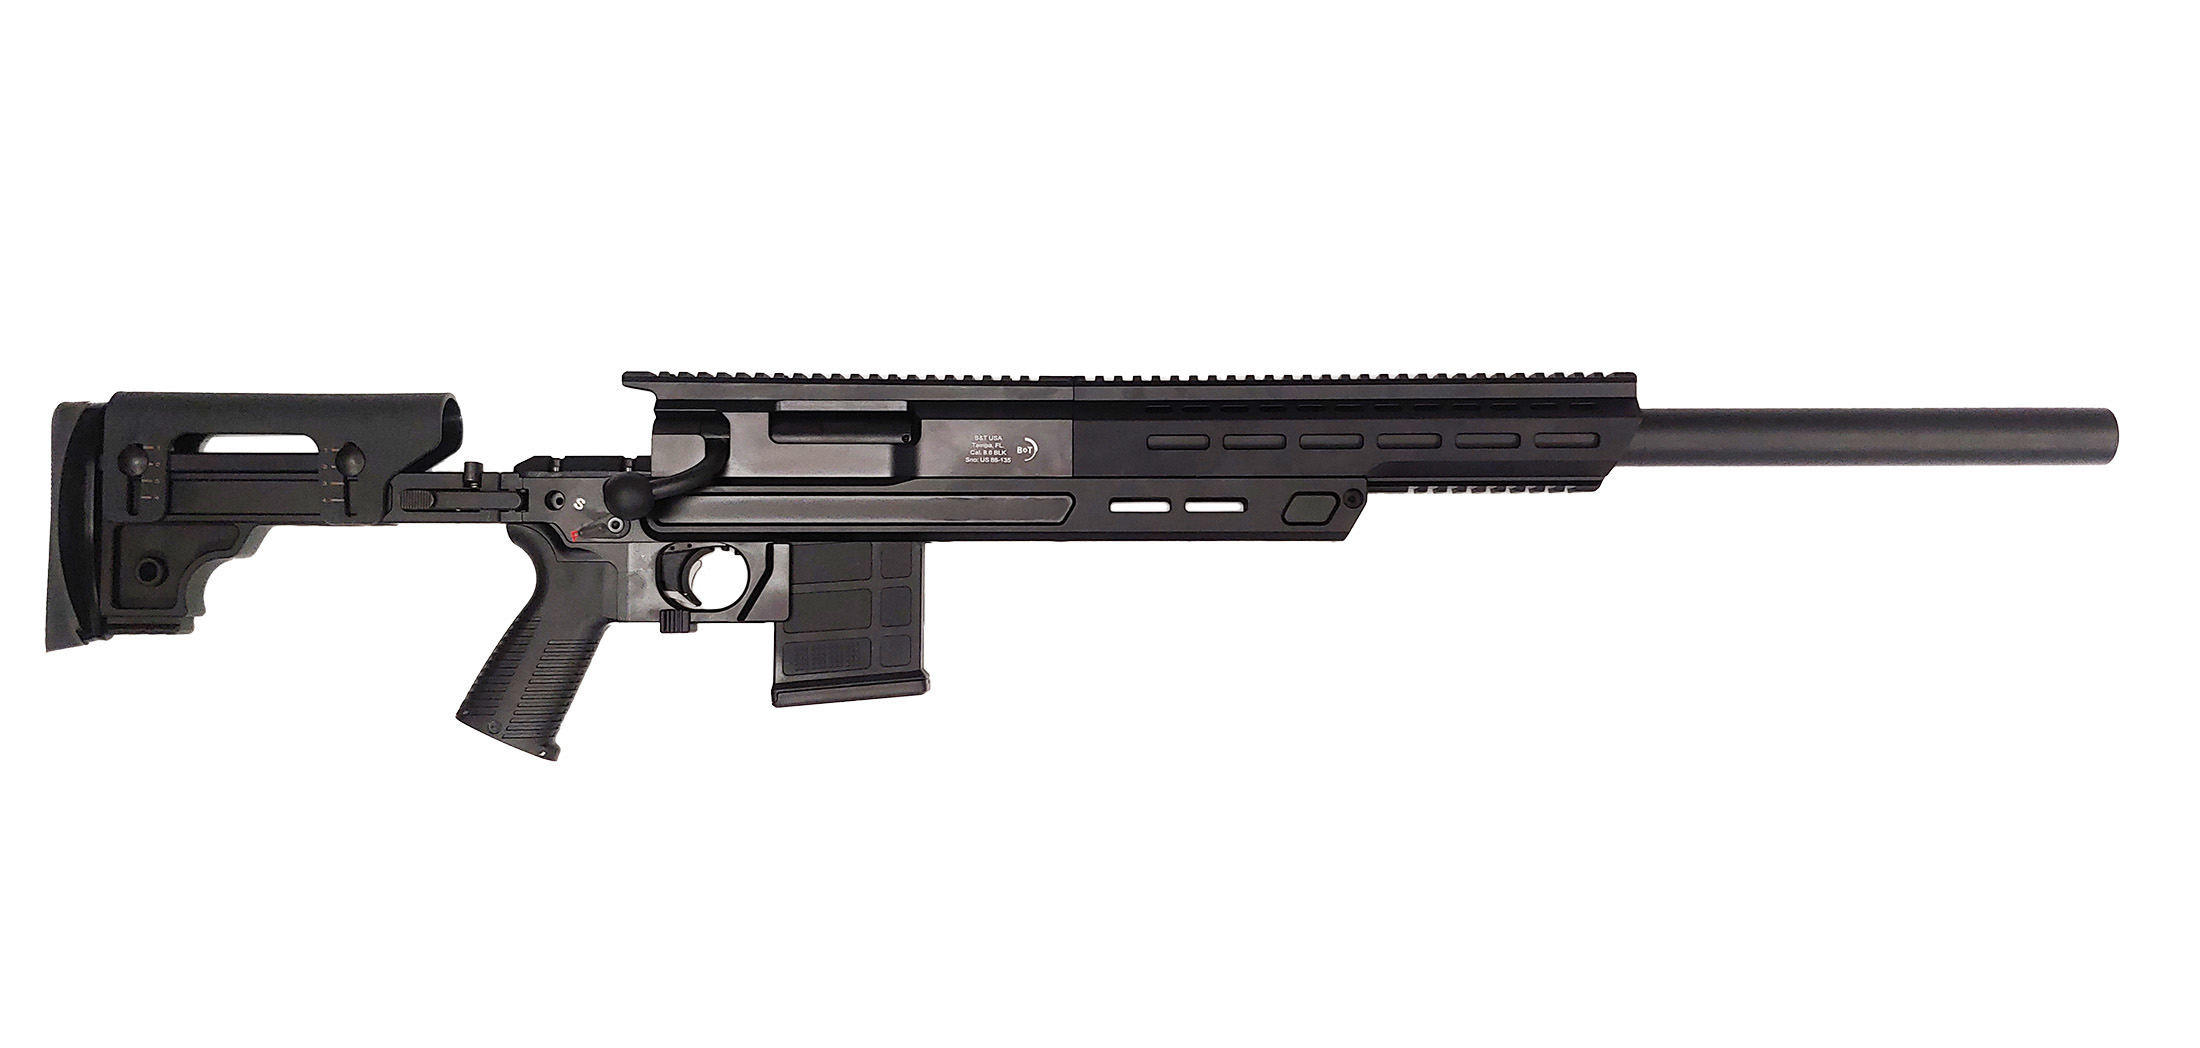 Picatinny Rail Fully Adjustable Stock - Noreen Firearms